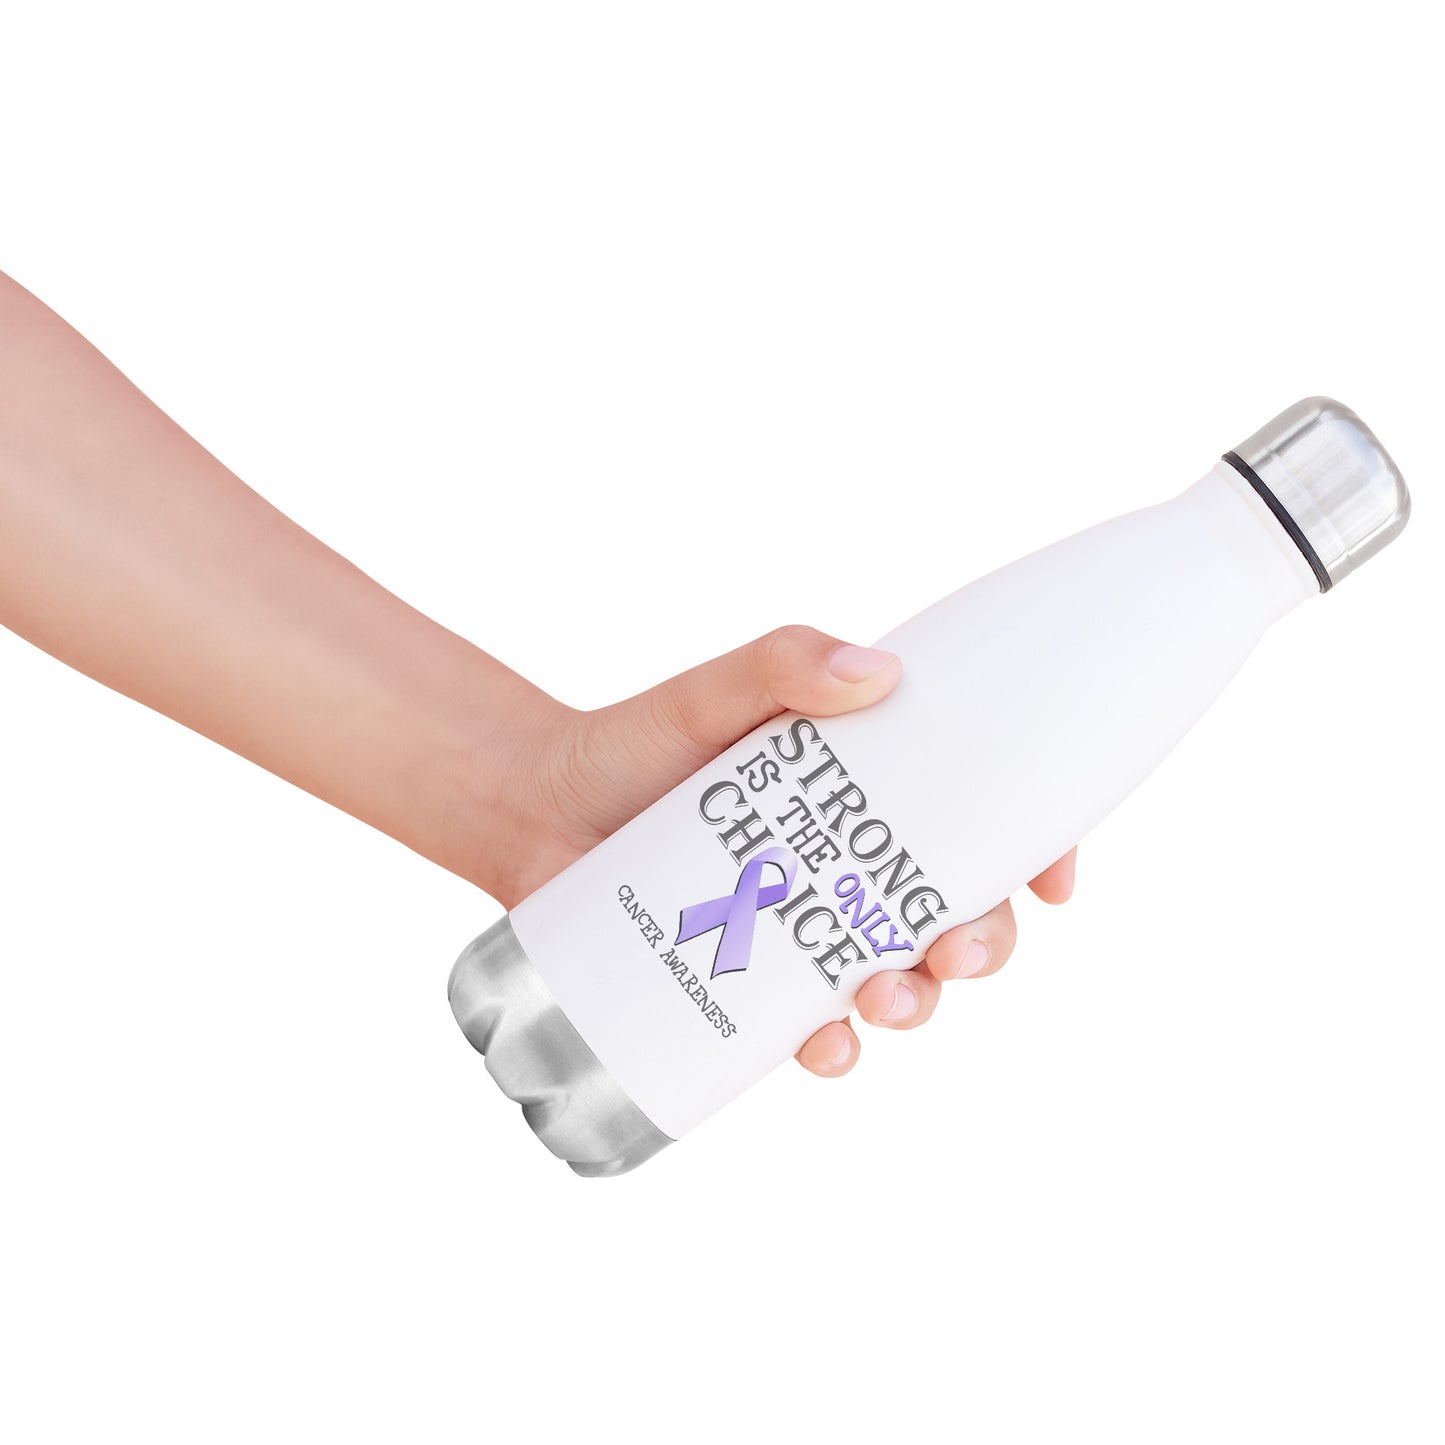 Strong is the Only Choice -Cancer Awareness 20oz Insulated Water Bottle